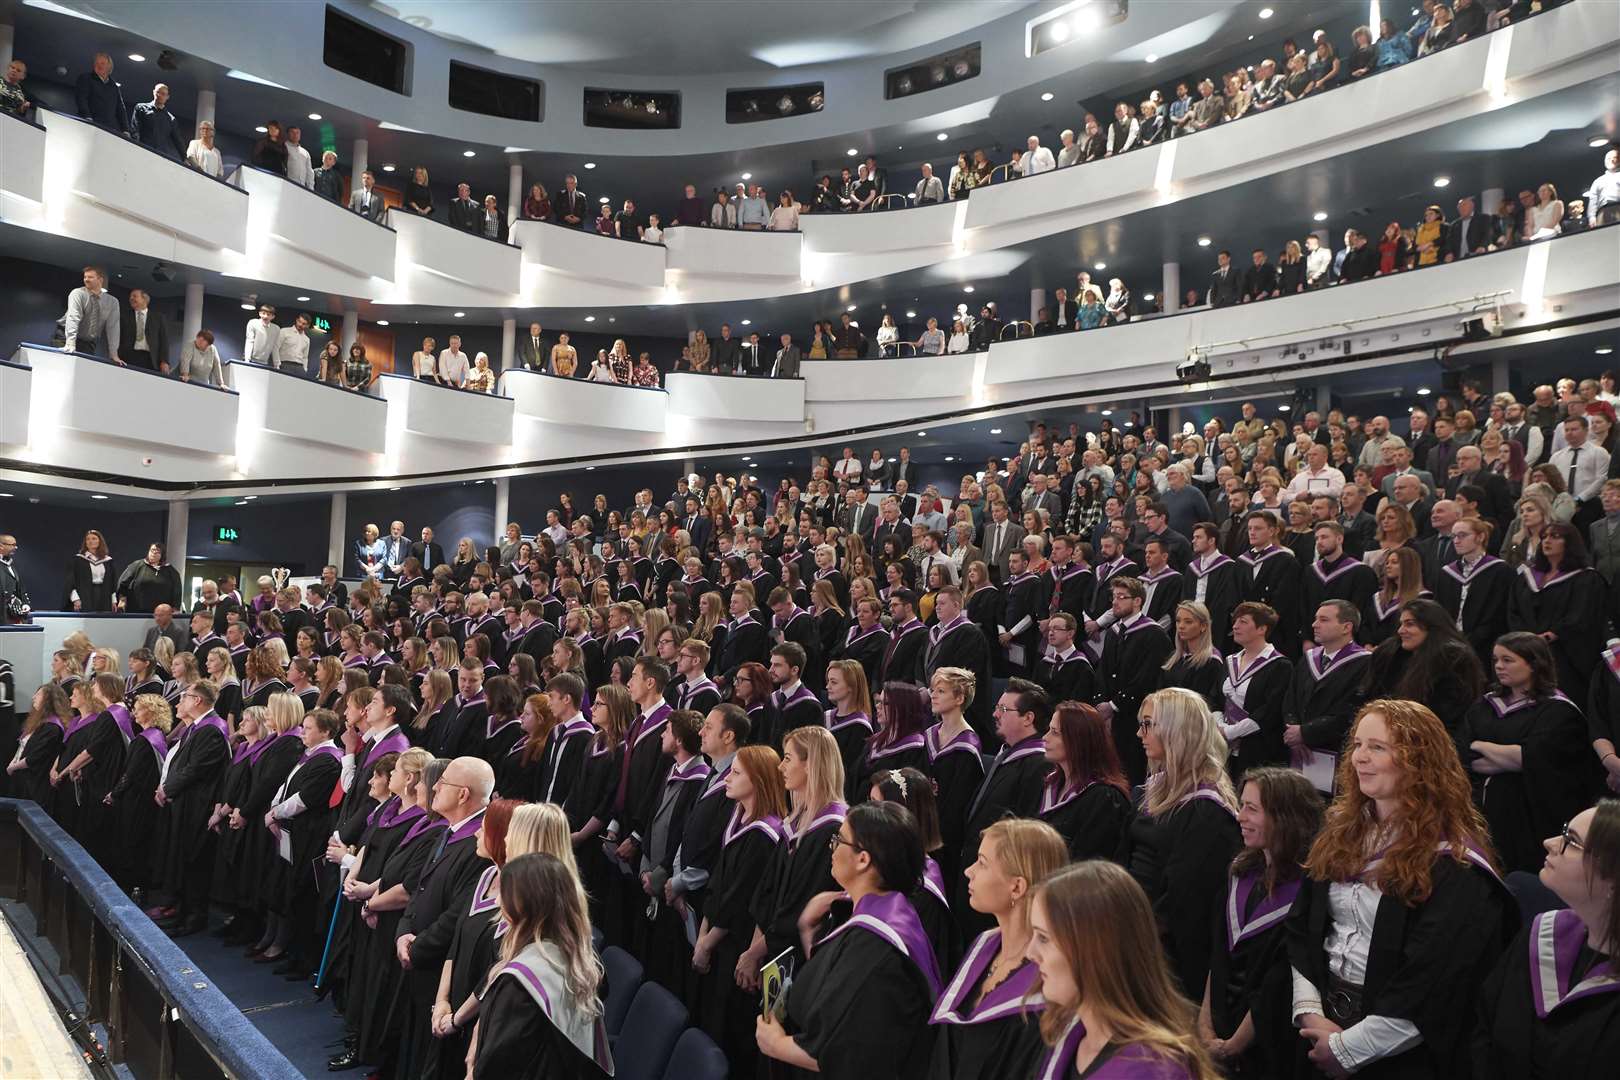 The auditorium of Eden Court's Empire Theatre hosting a UHI graduation ceremony. It has struggled to attract bigger shows due to limited seating.